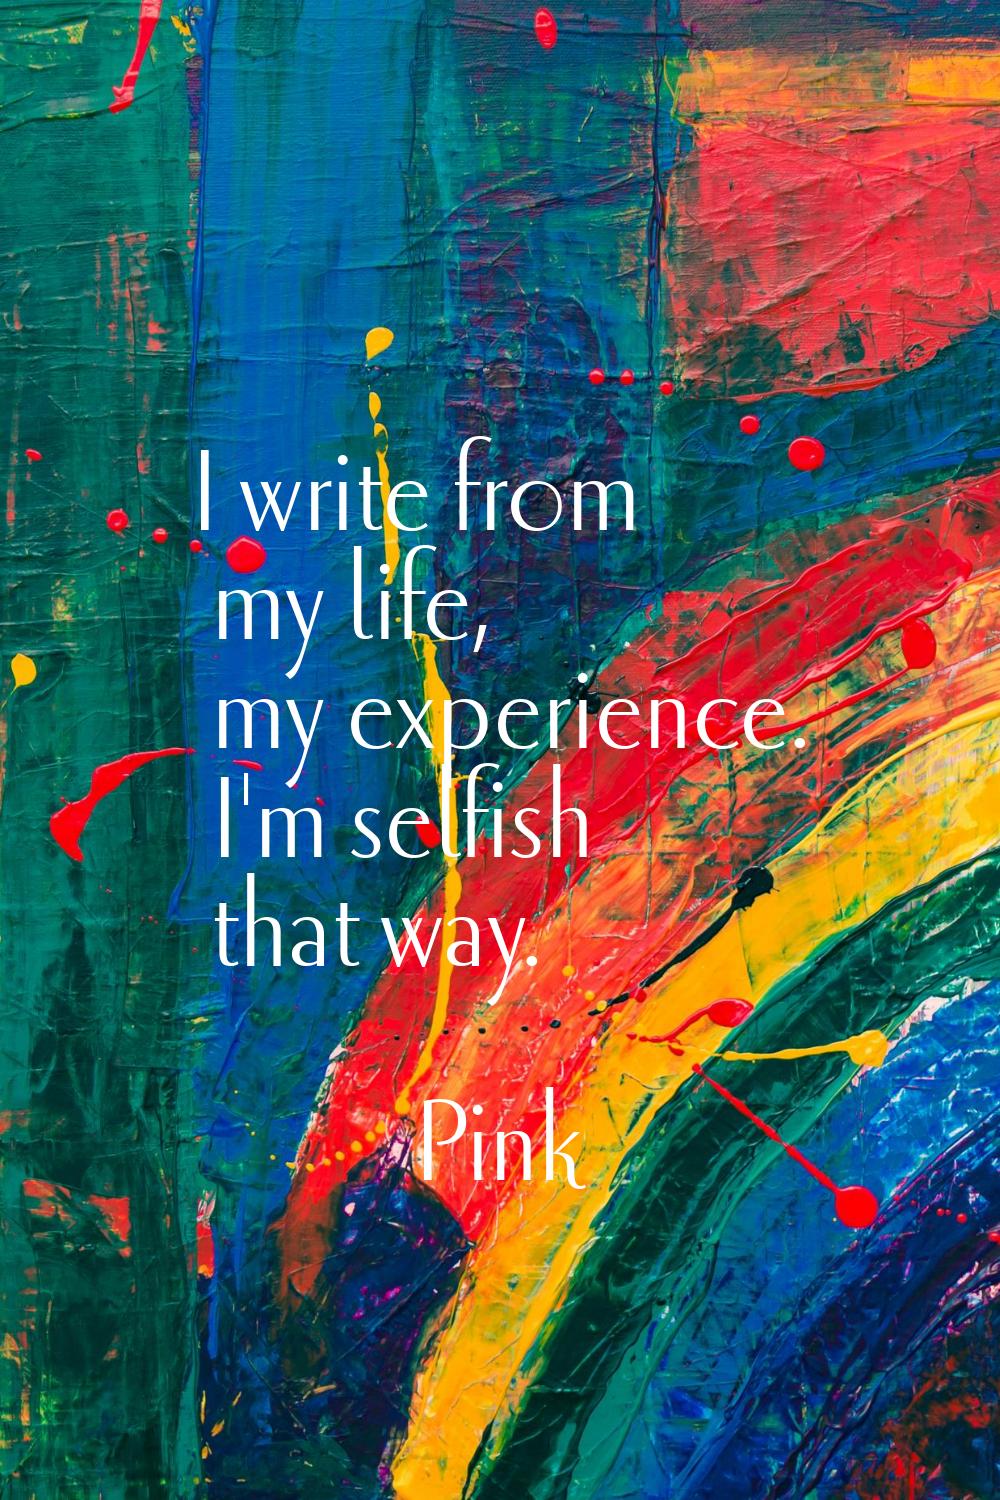 I write from my life, my experience. I'm selfish that way.